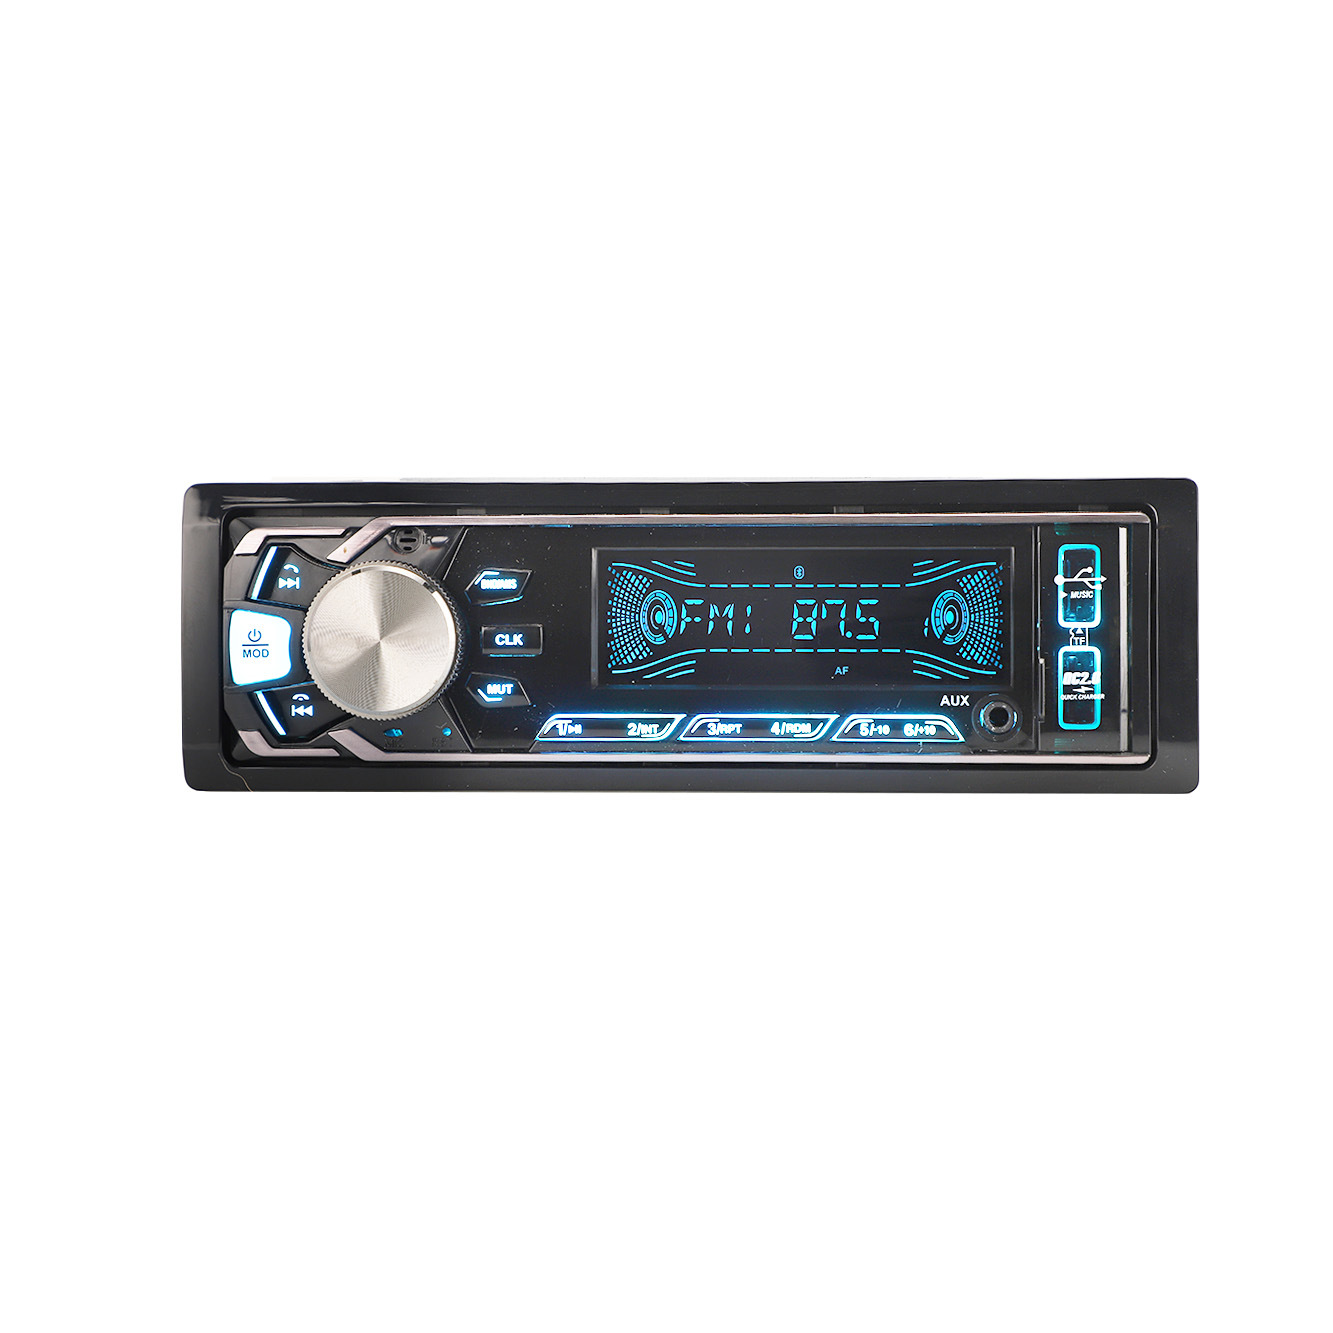 MP3 Player for Car Stereo Car Stereo MP3 Player Auto Car MP3 Player MP3 Player To Car Stereo Car Radio Multi-Color Car MP3 Player